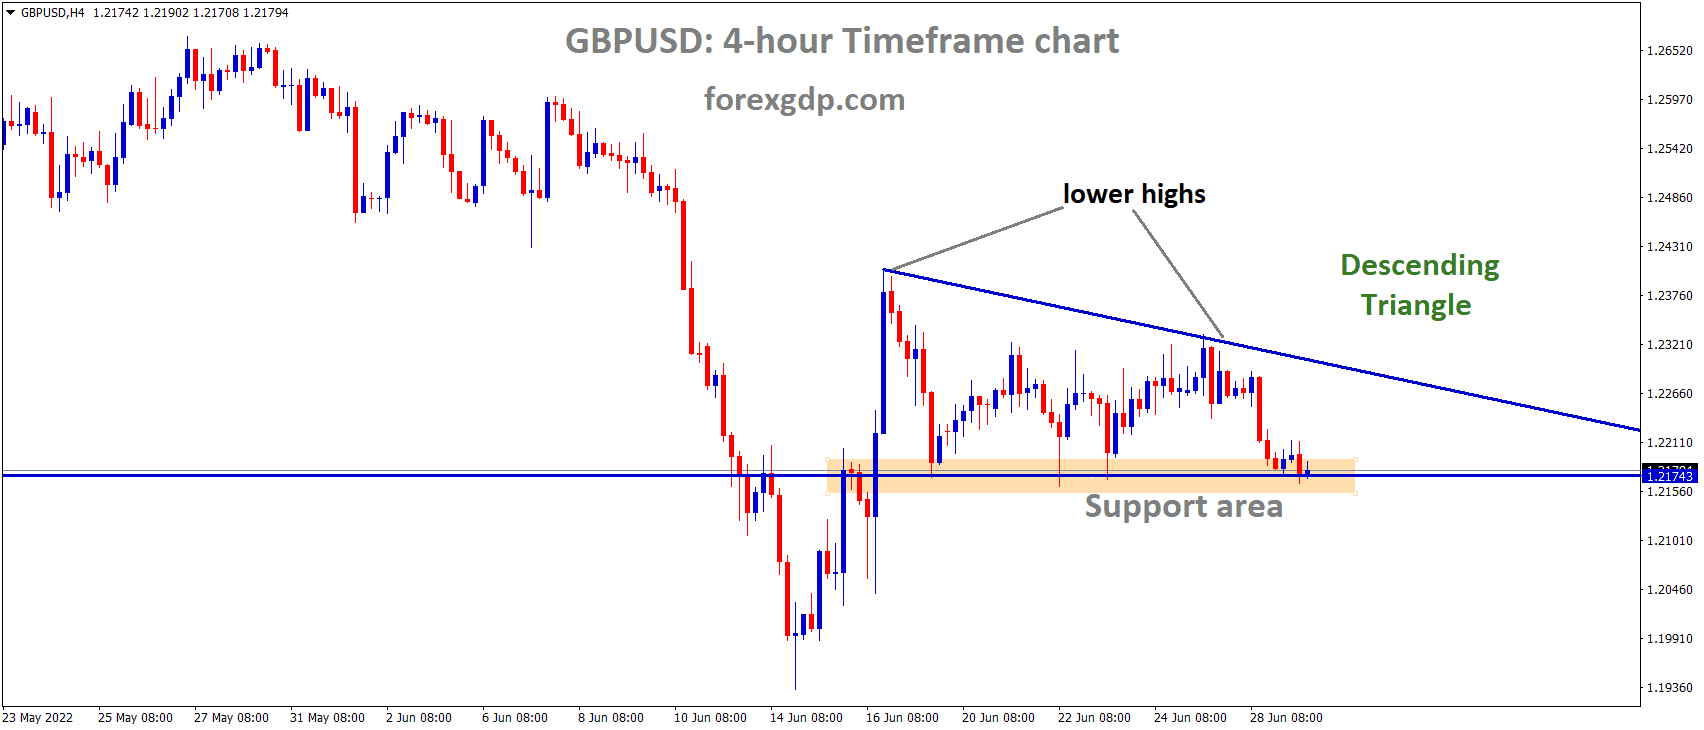 GBPUSD is moving in the Descending triangle pattern and the market has reached the Horizontal support area of the Pattern